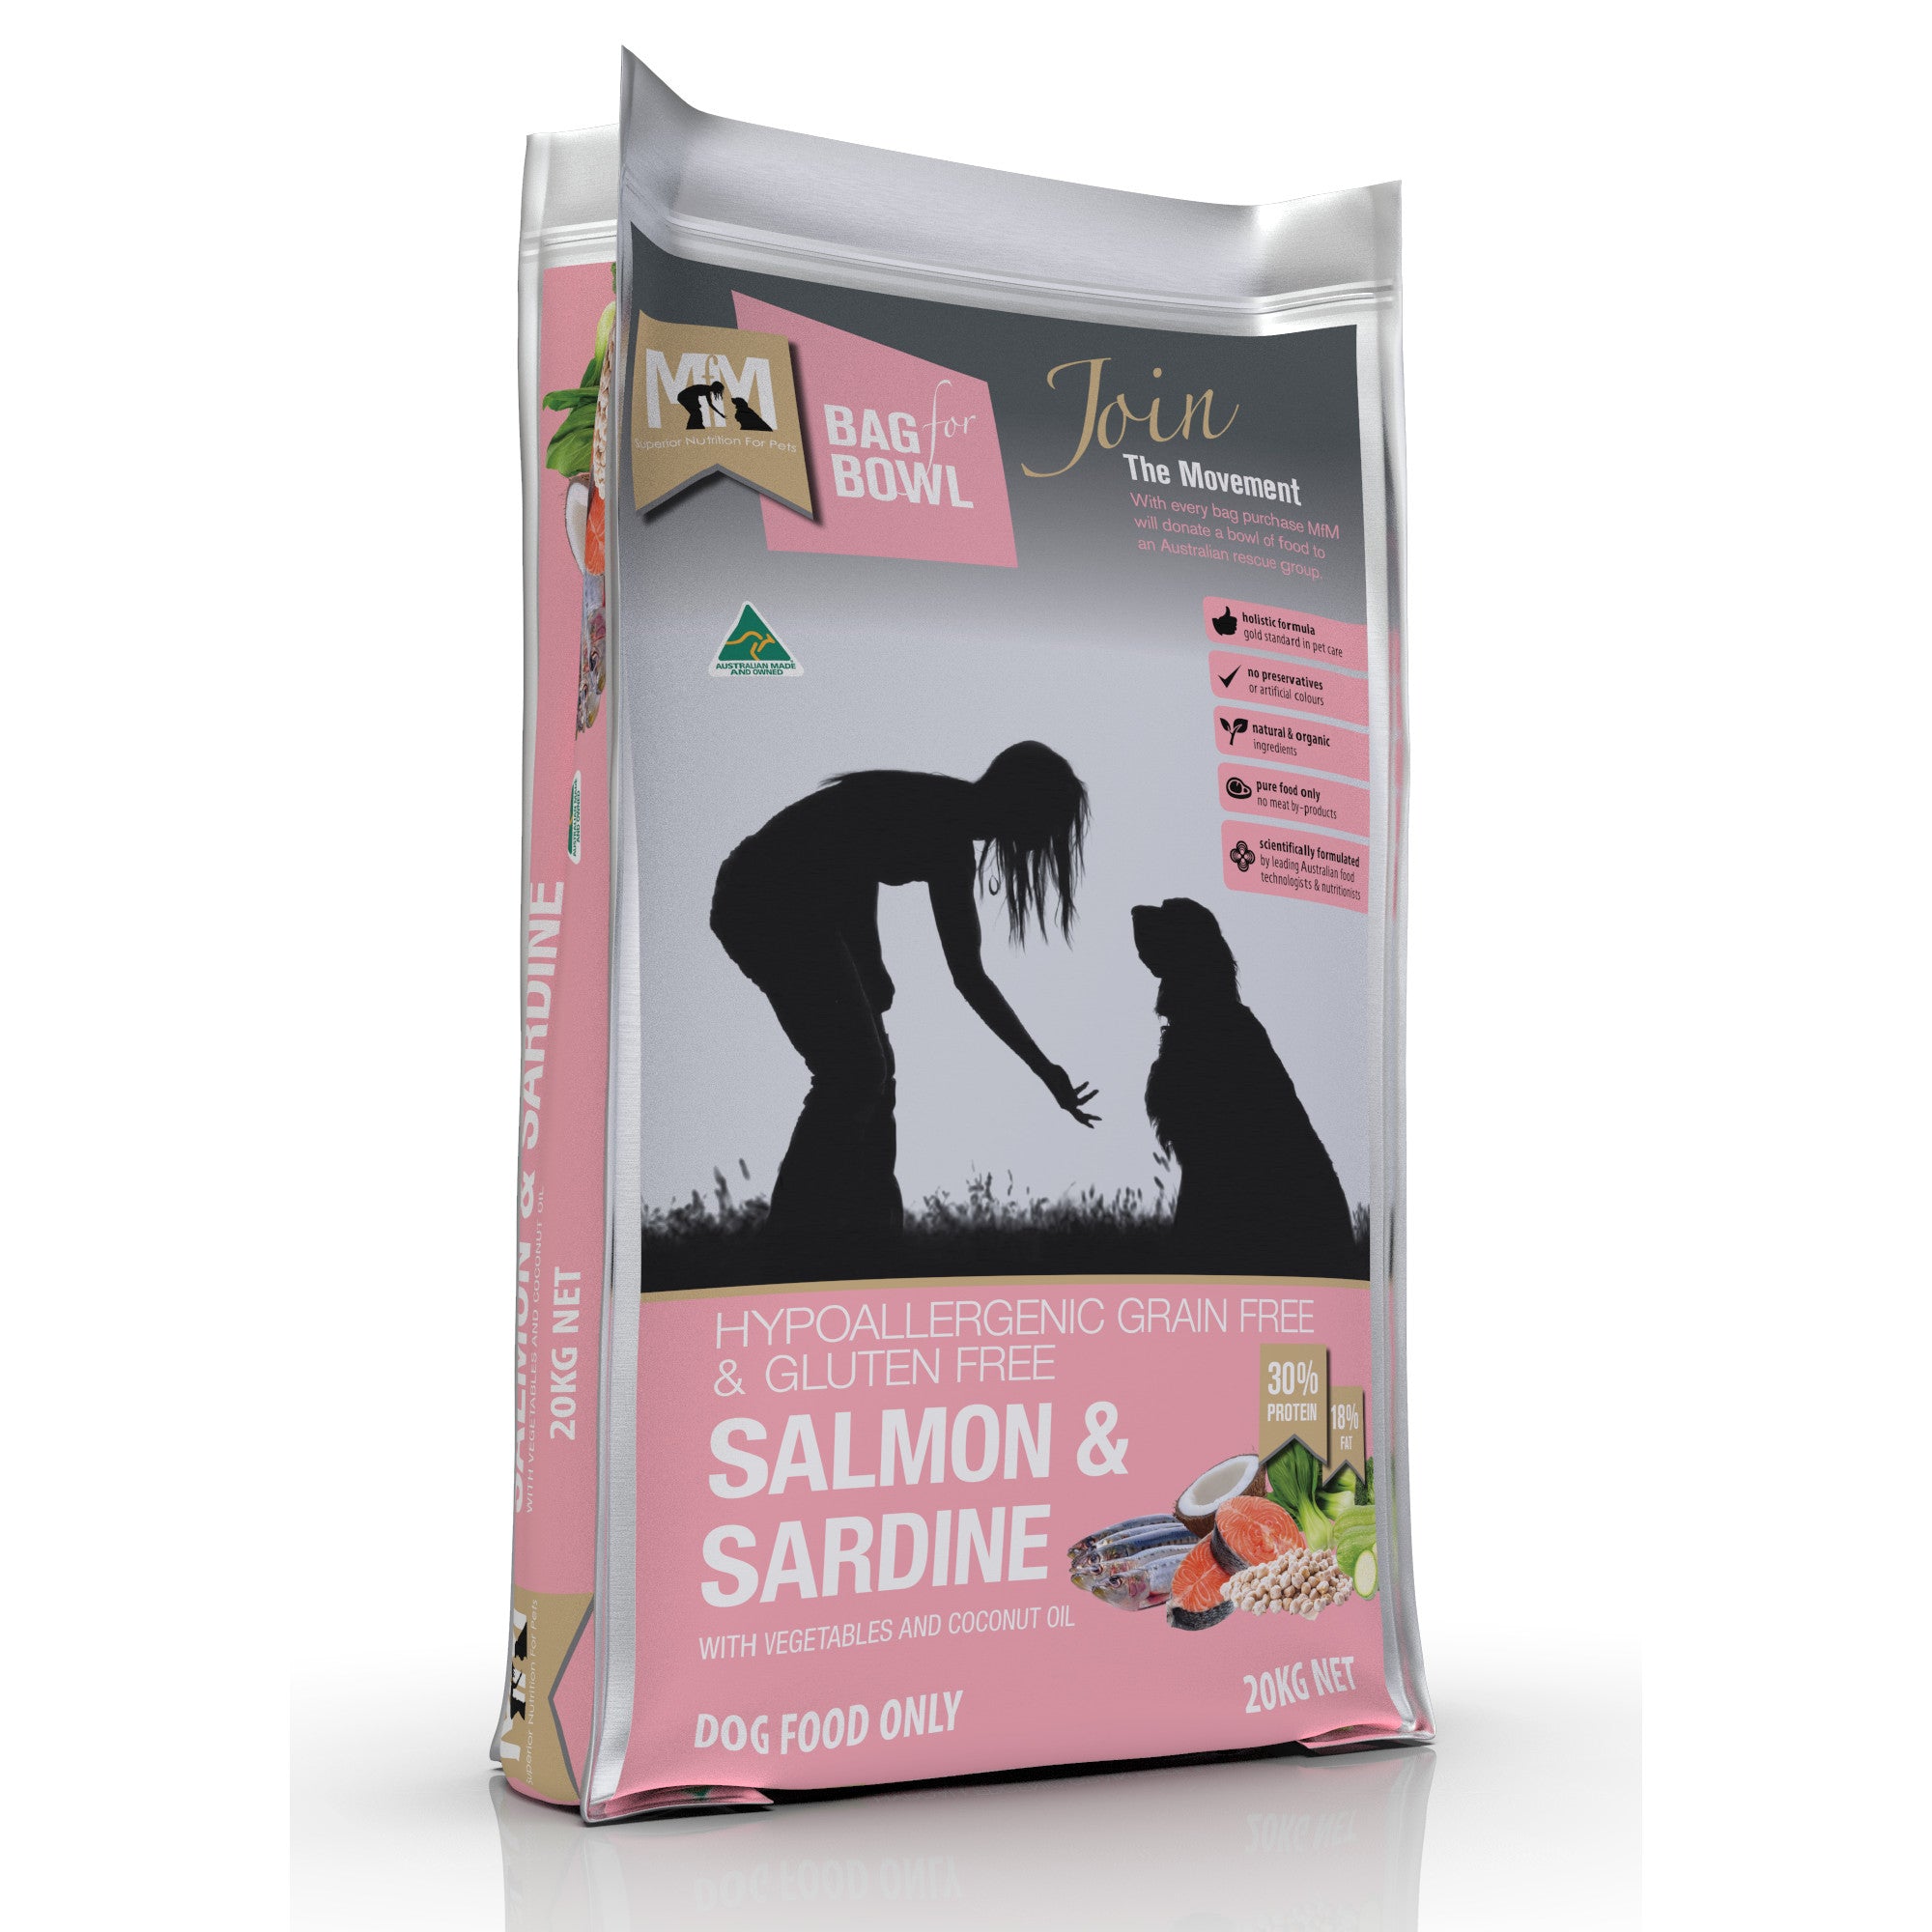 Meals for Mutts Grain Free Salmon and Sardine Dog Food 20kg.